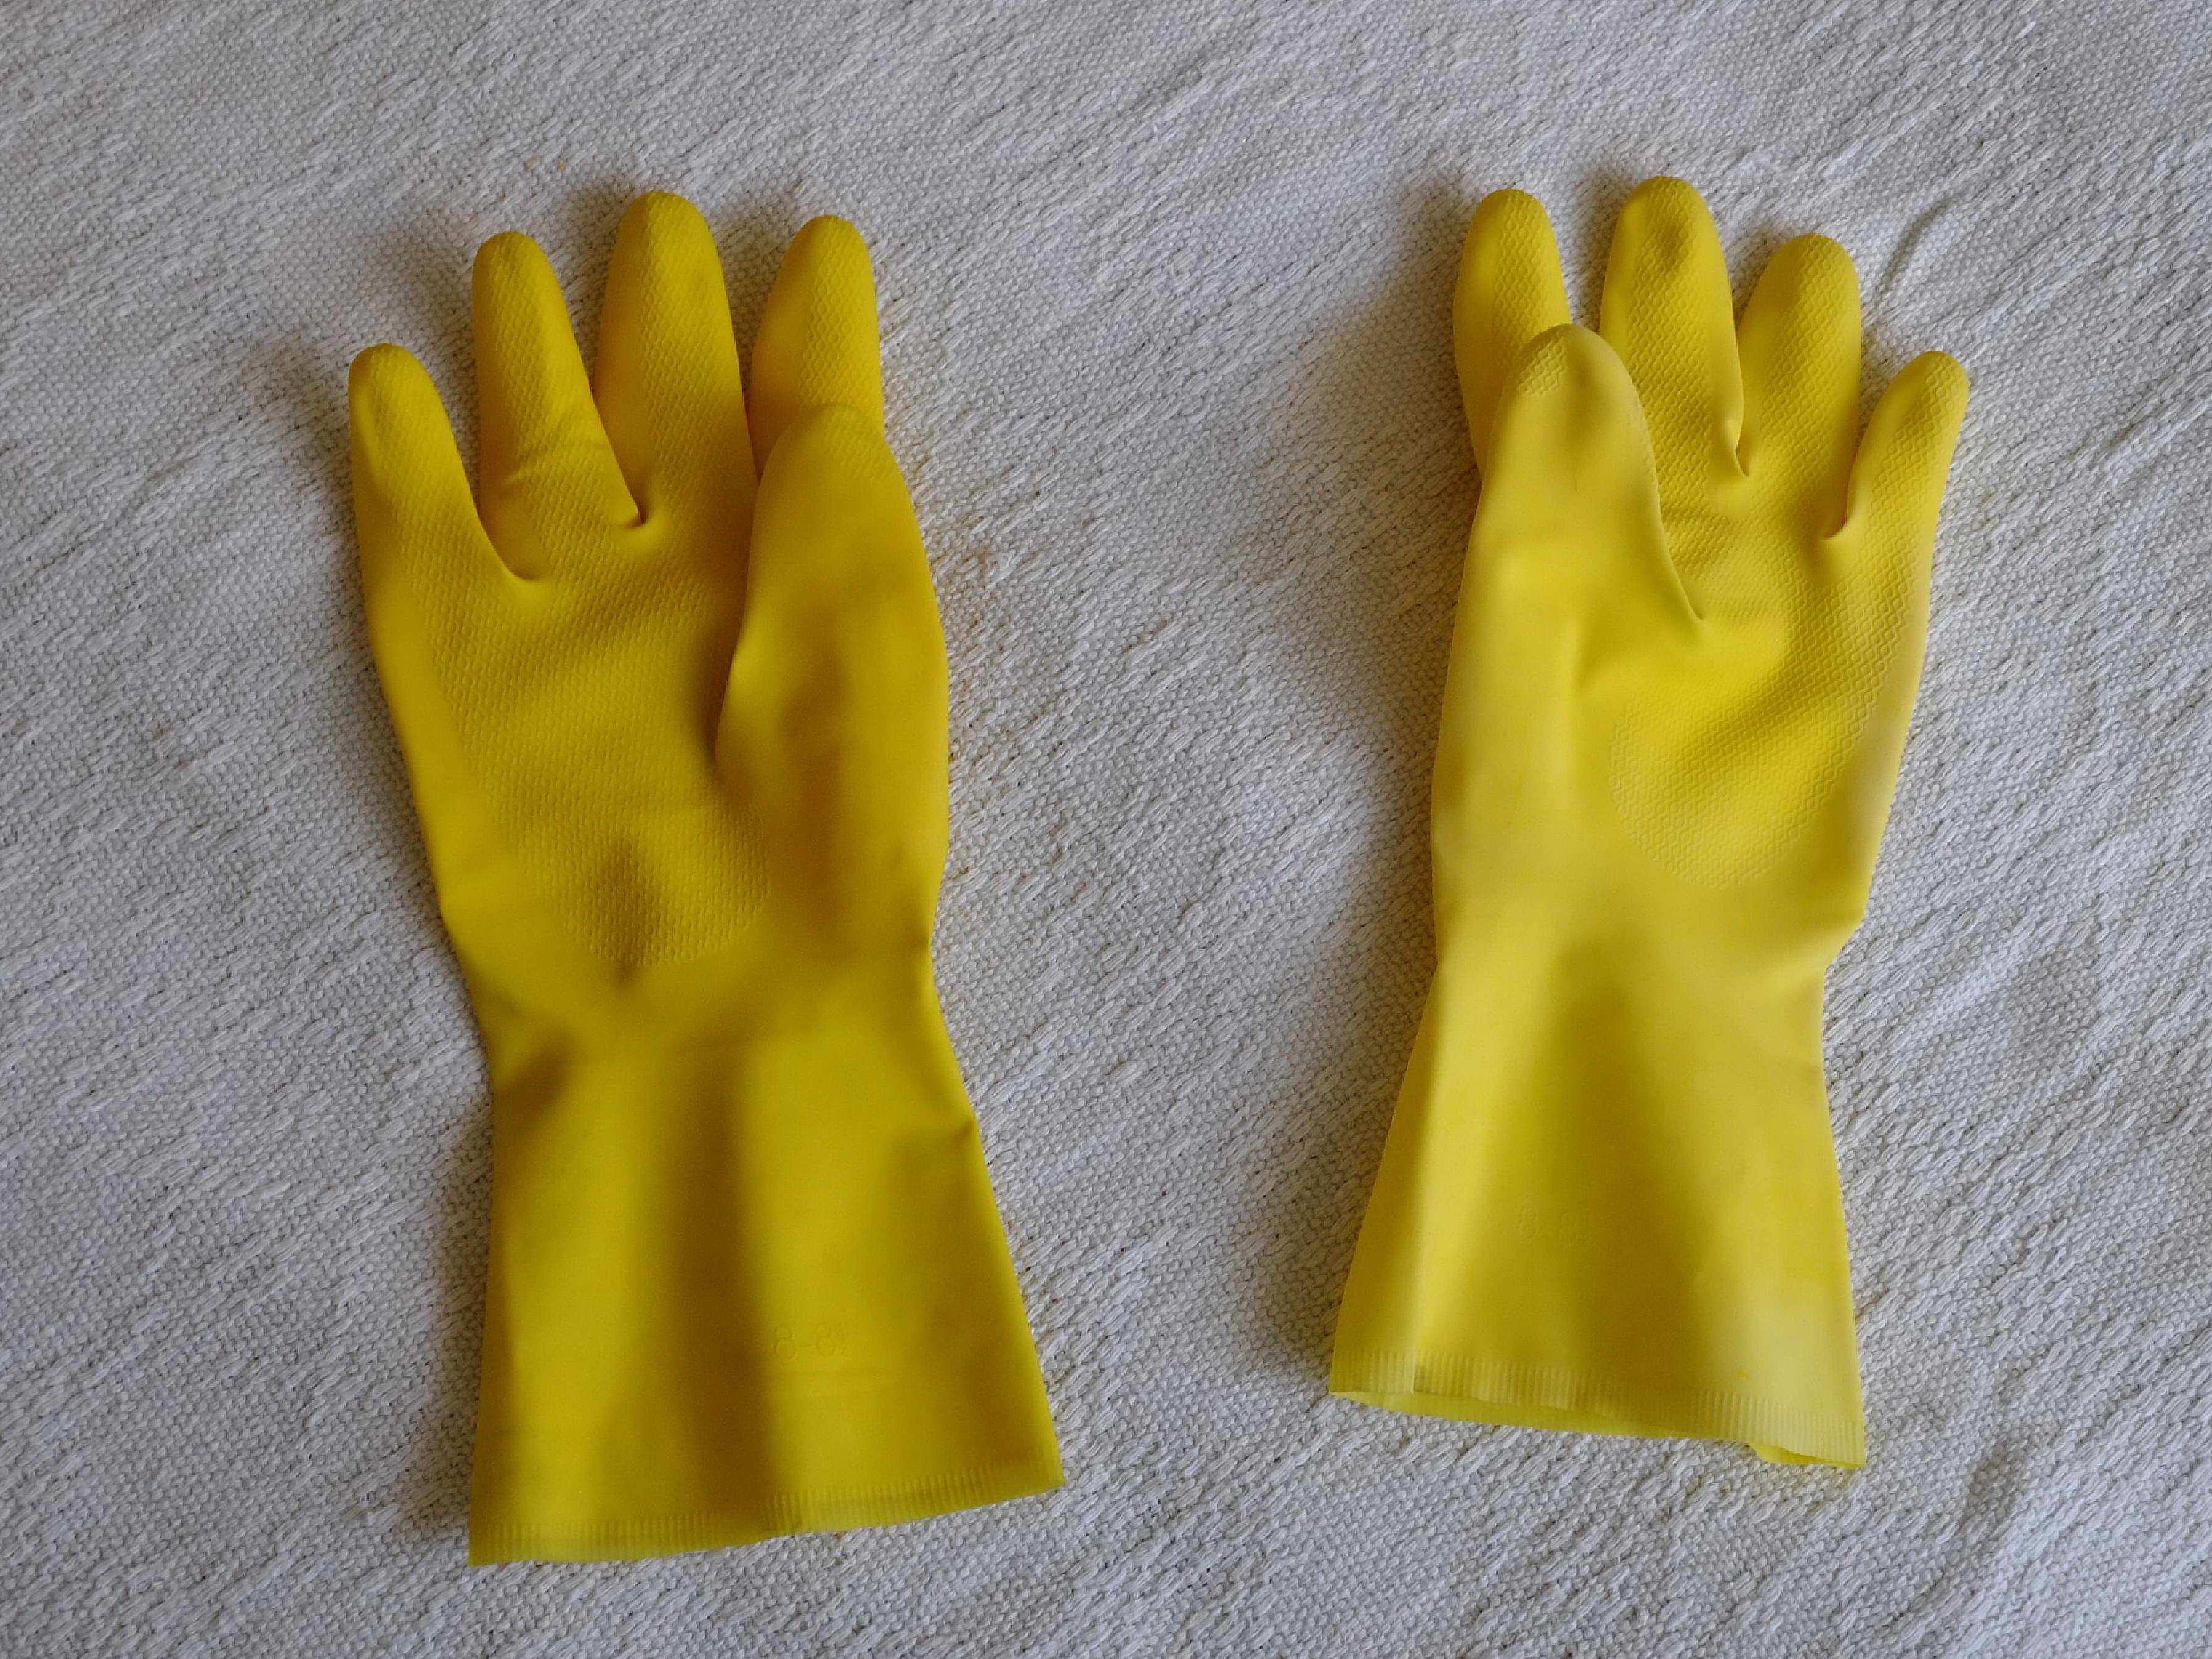 Yellow rubber gloves